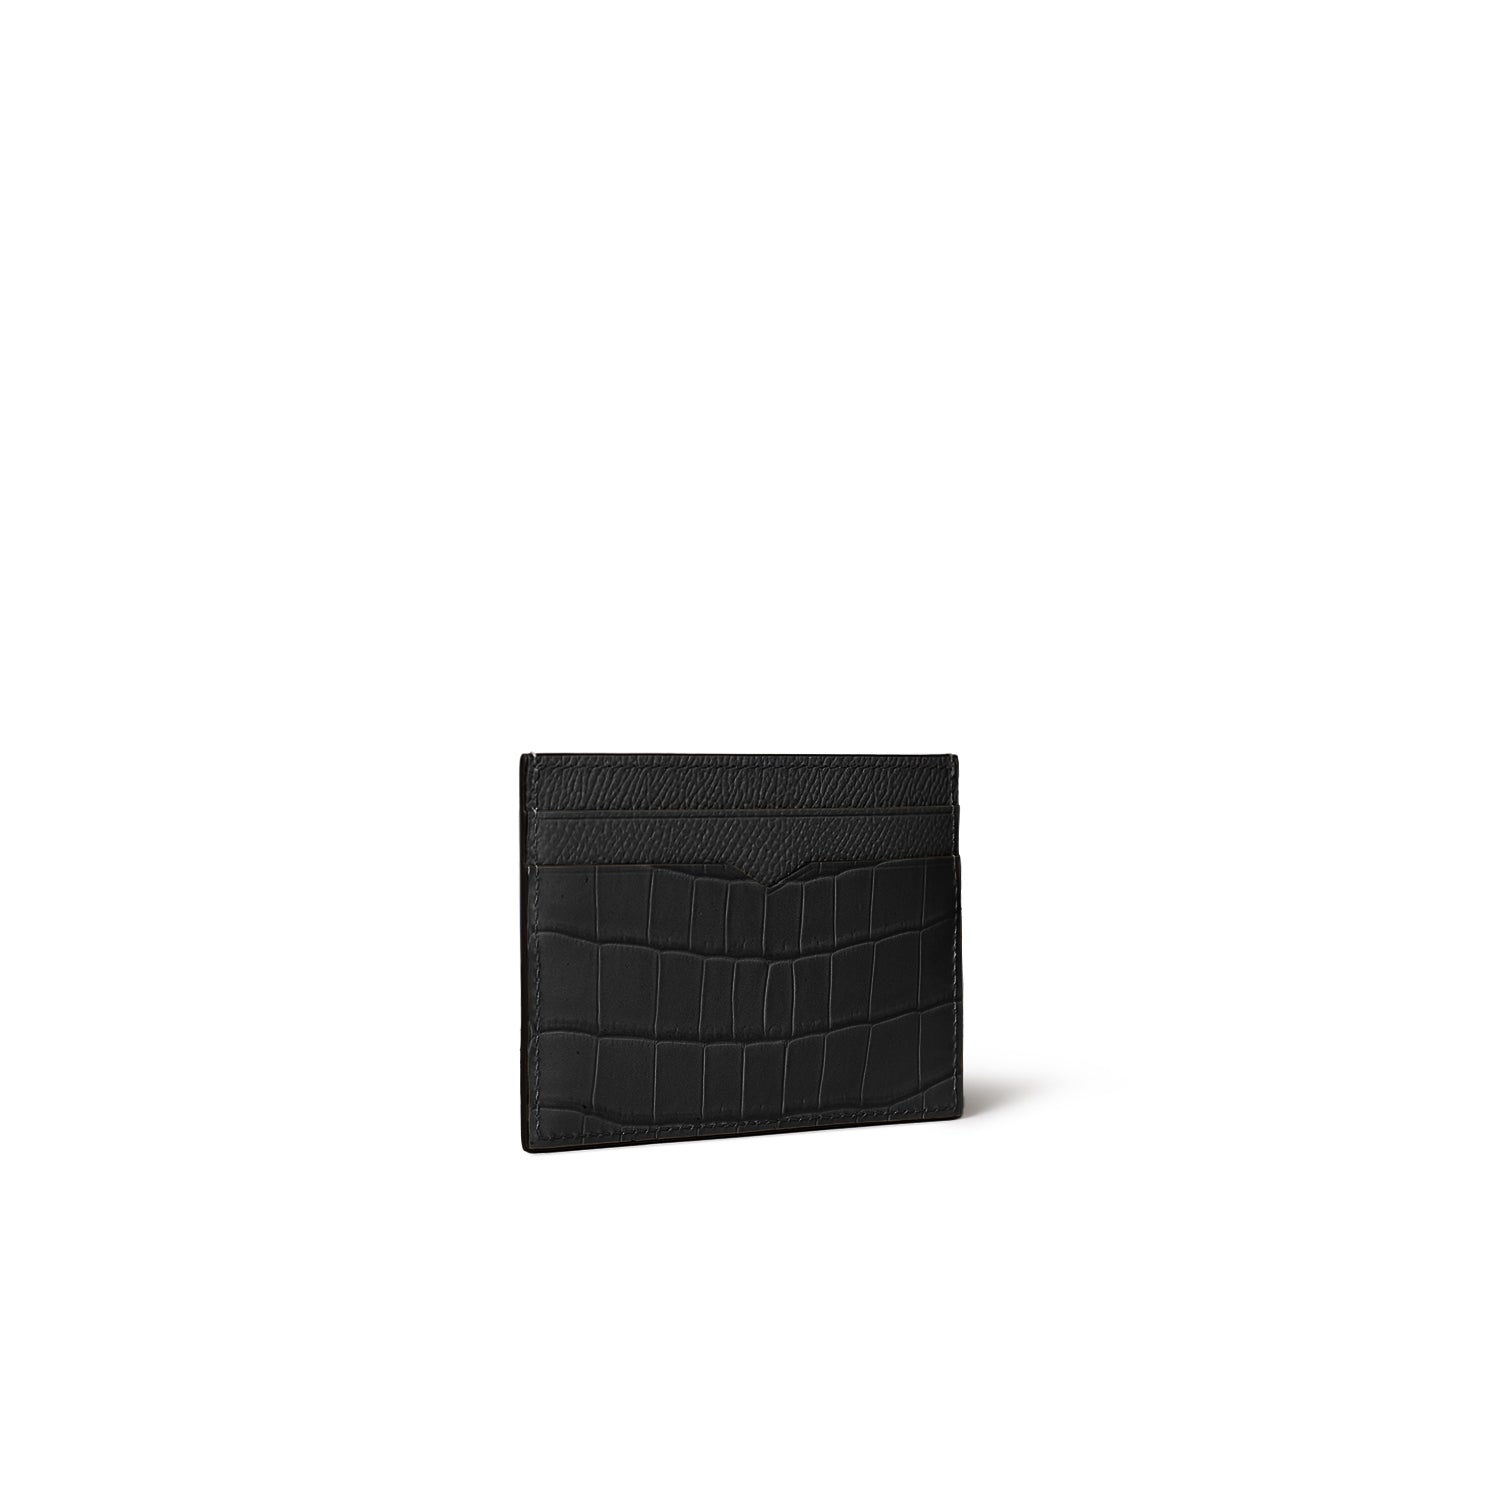 Slim card case in Noblesse and embossed crocodile leather, black